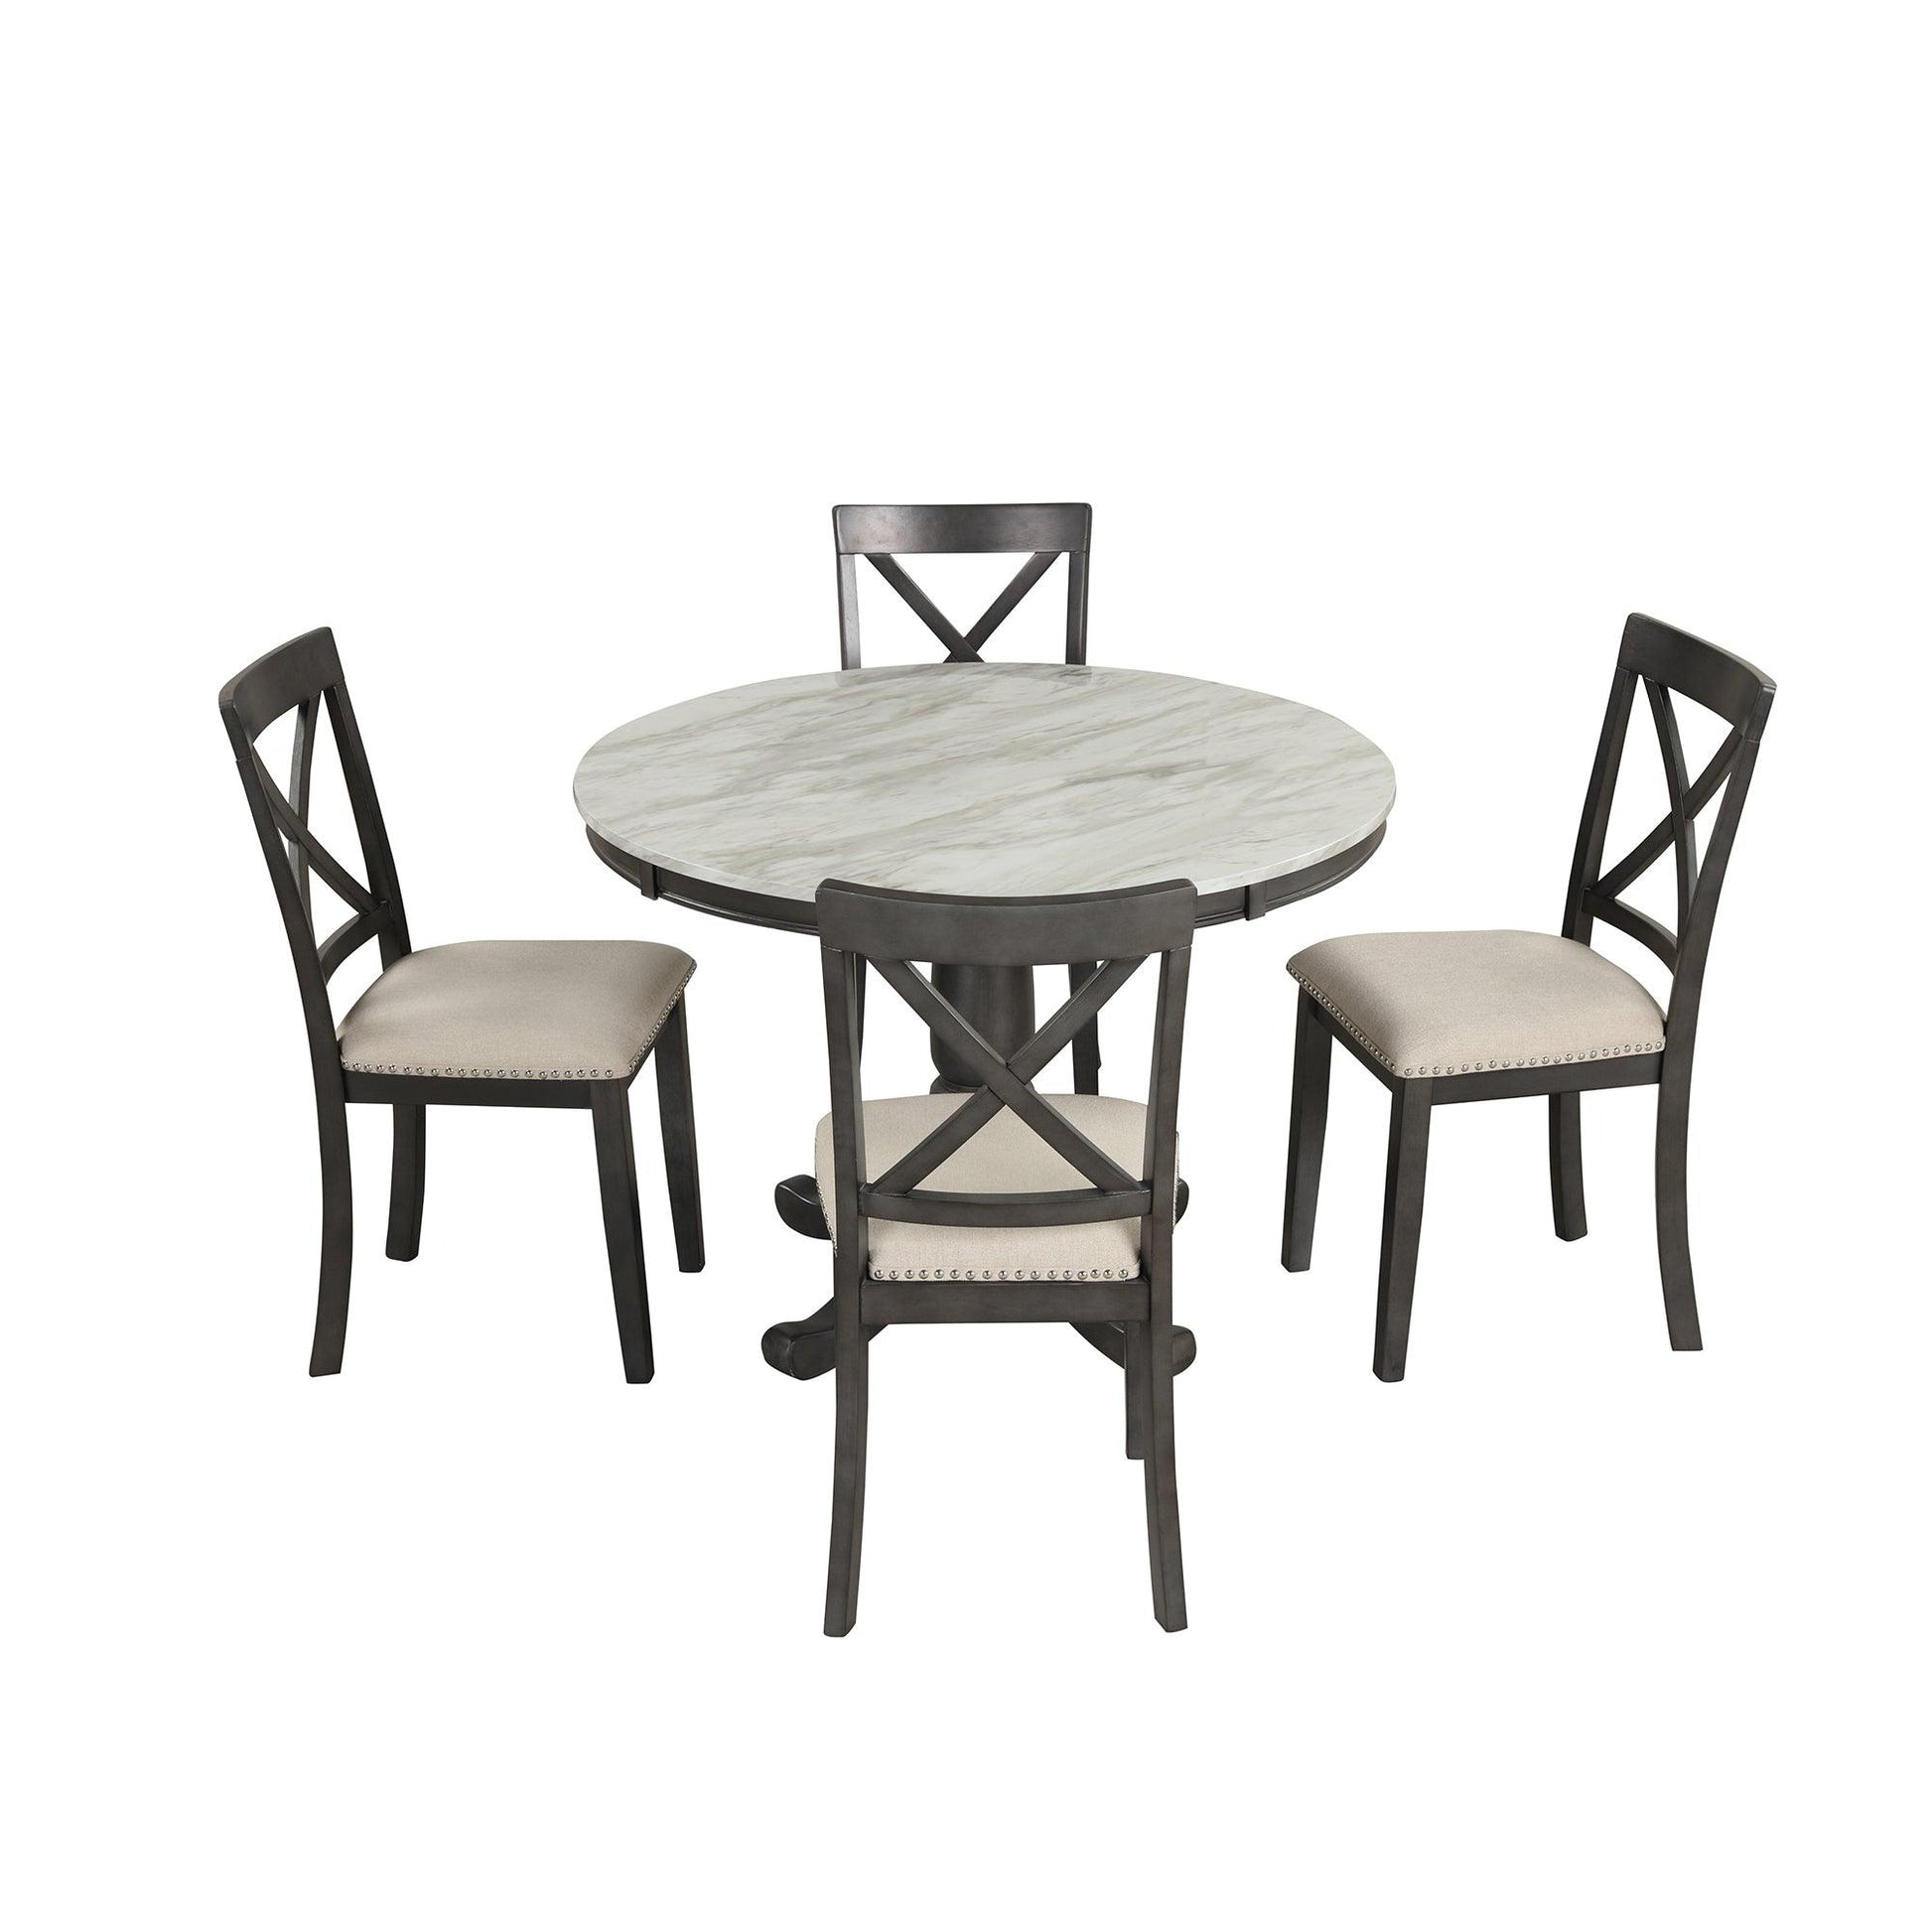 Orisfur 5 Pieces Dining Table and Chairs Set for 4 Persons Kitchen Room Solid Wood Table with 4 Chairs - FurniFindUSA